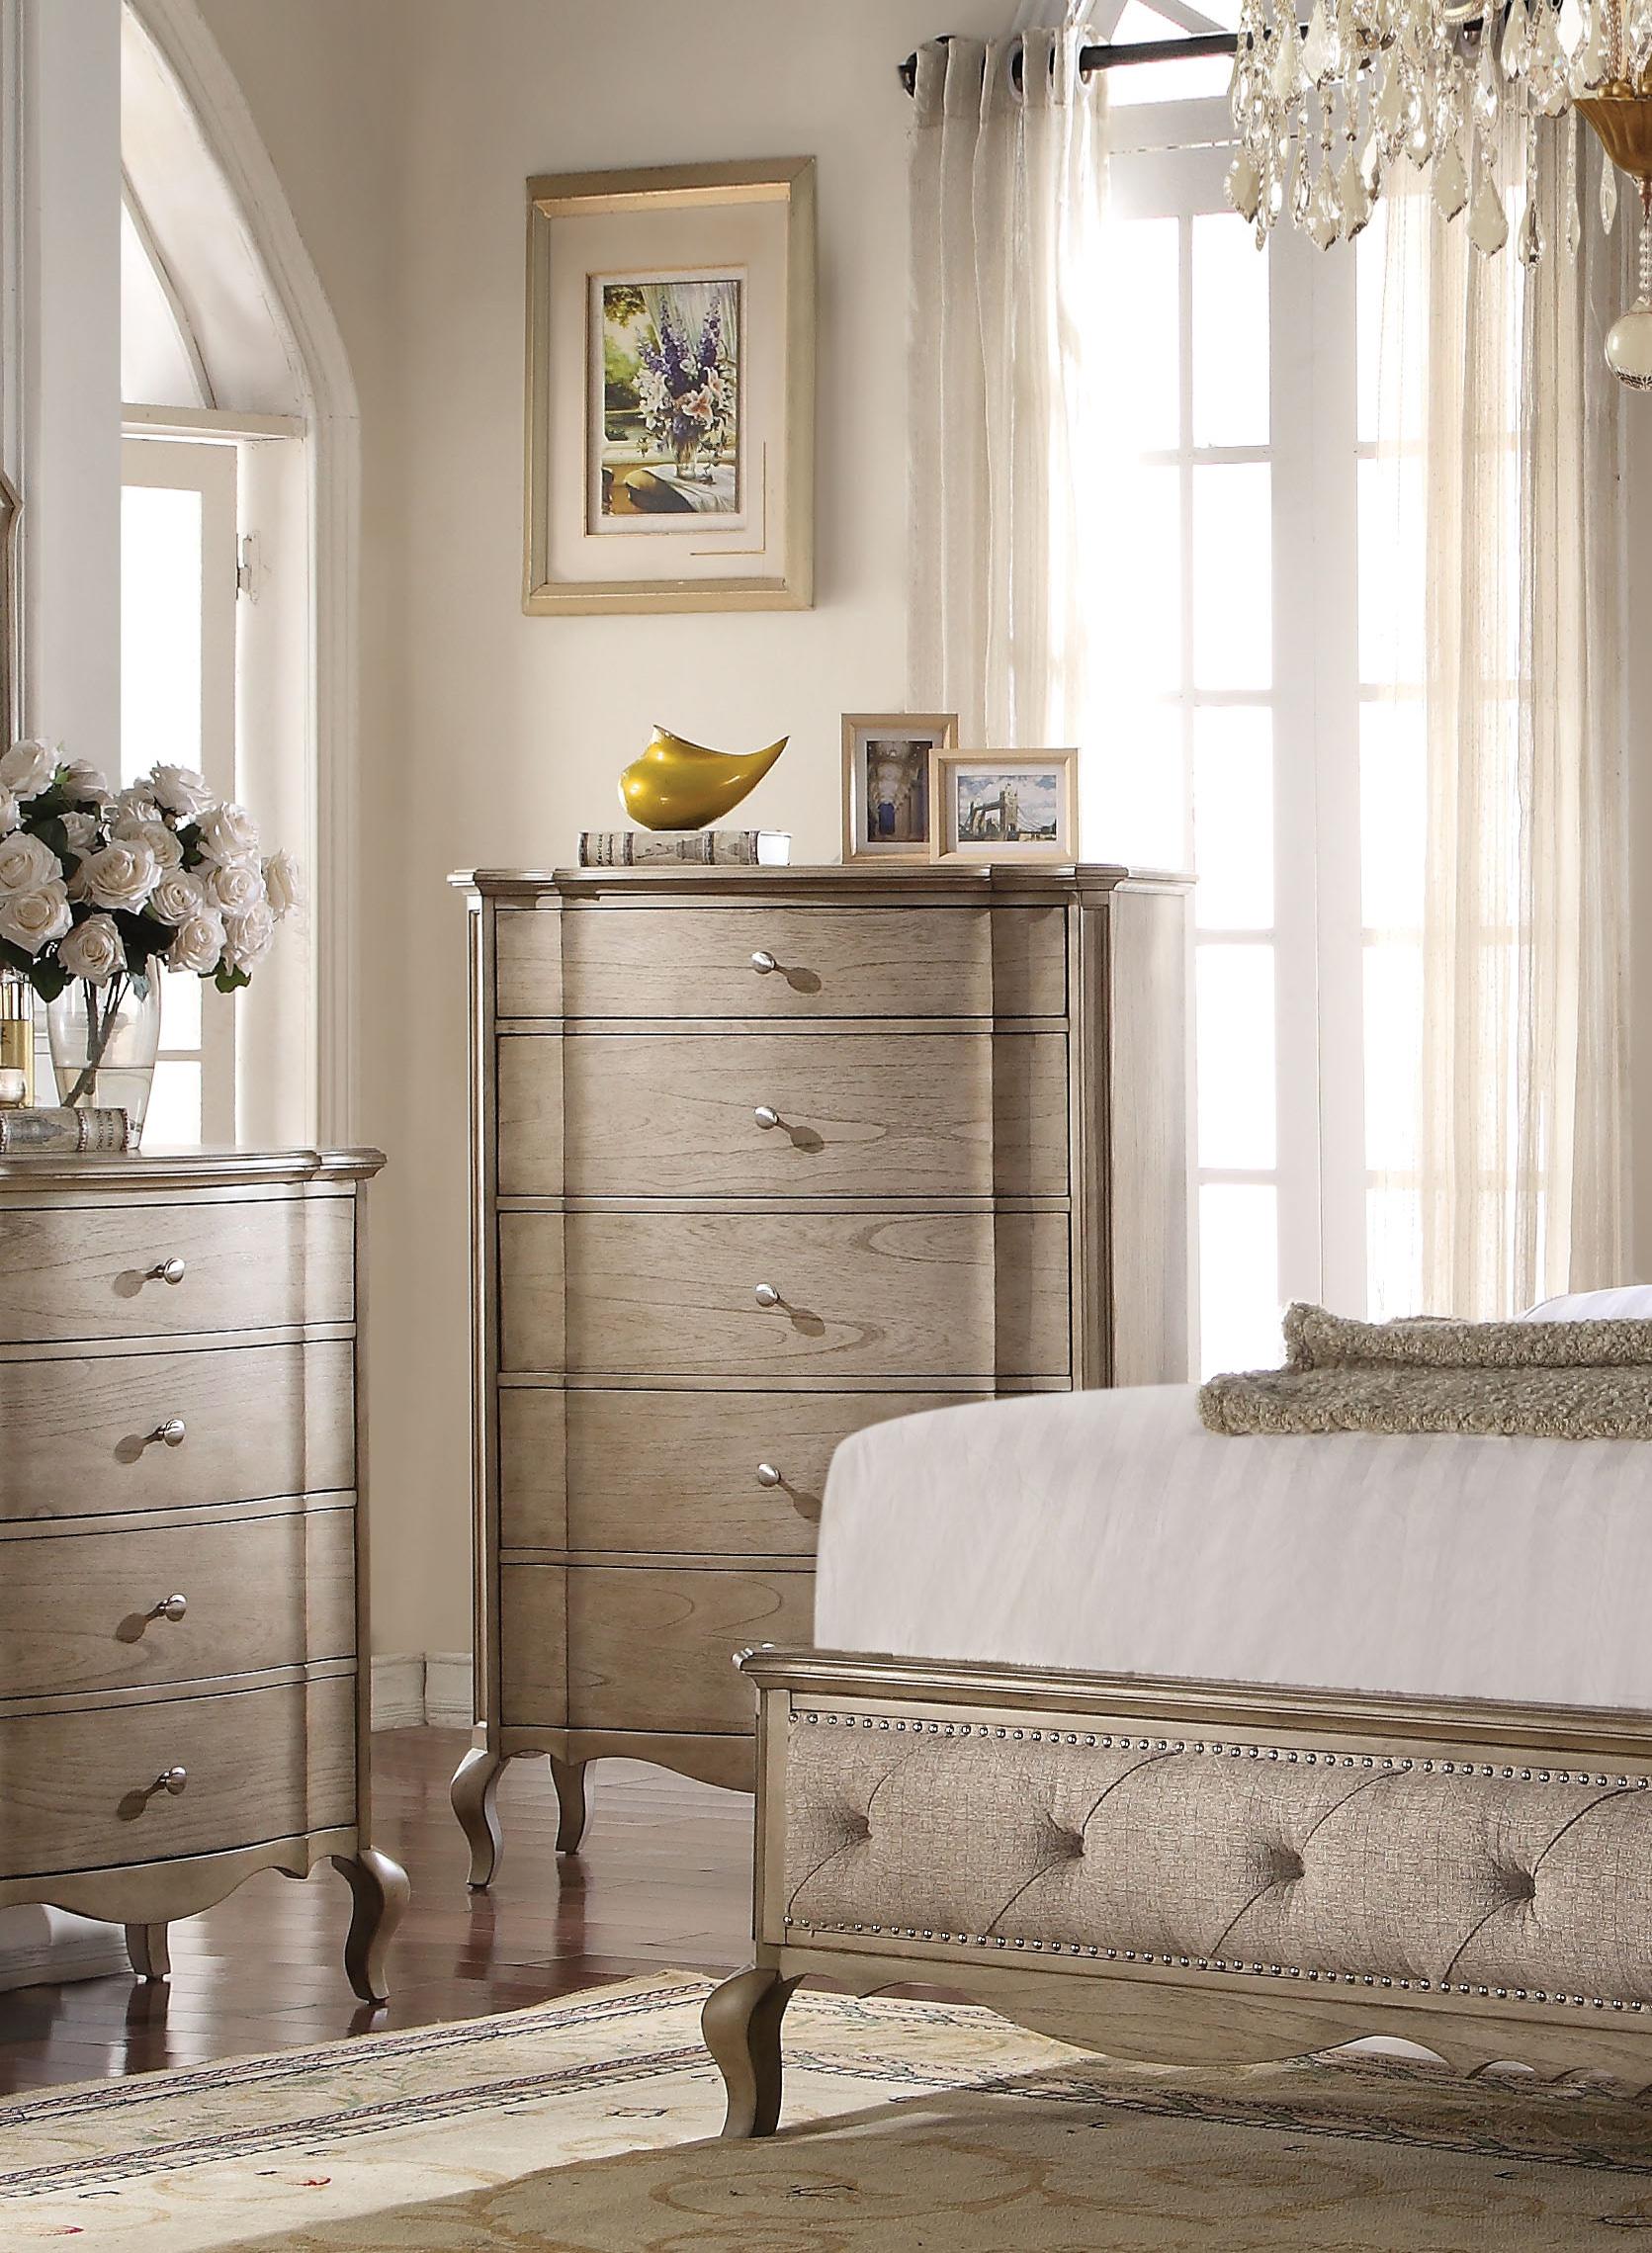 Classic, Traditional Bachelor Chest Chelmsford-26056 Chelmsford-26056 in Taupe, Beige 